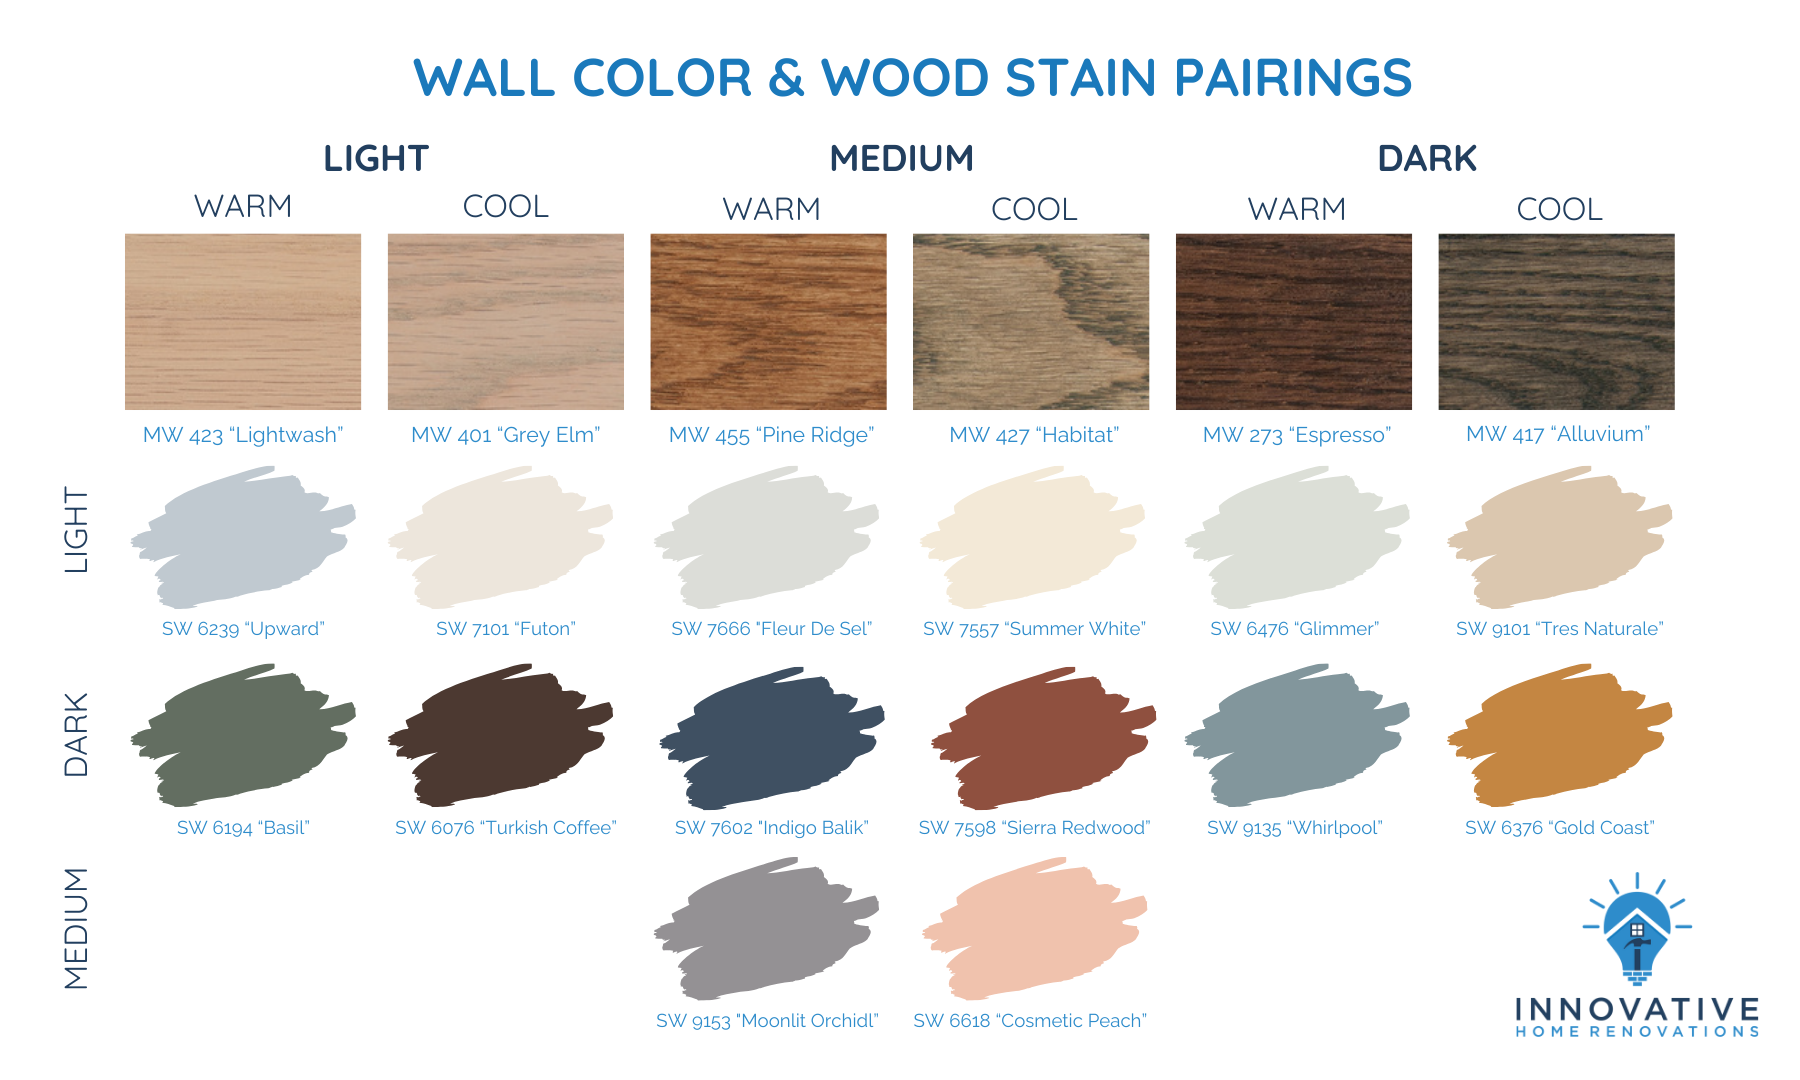 Top colors for Warm, light wood